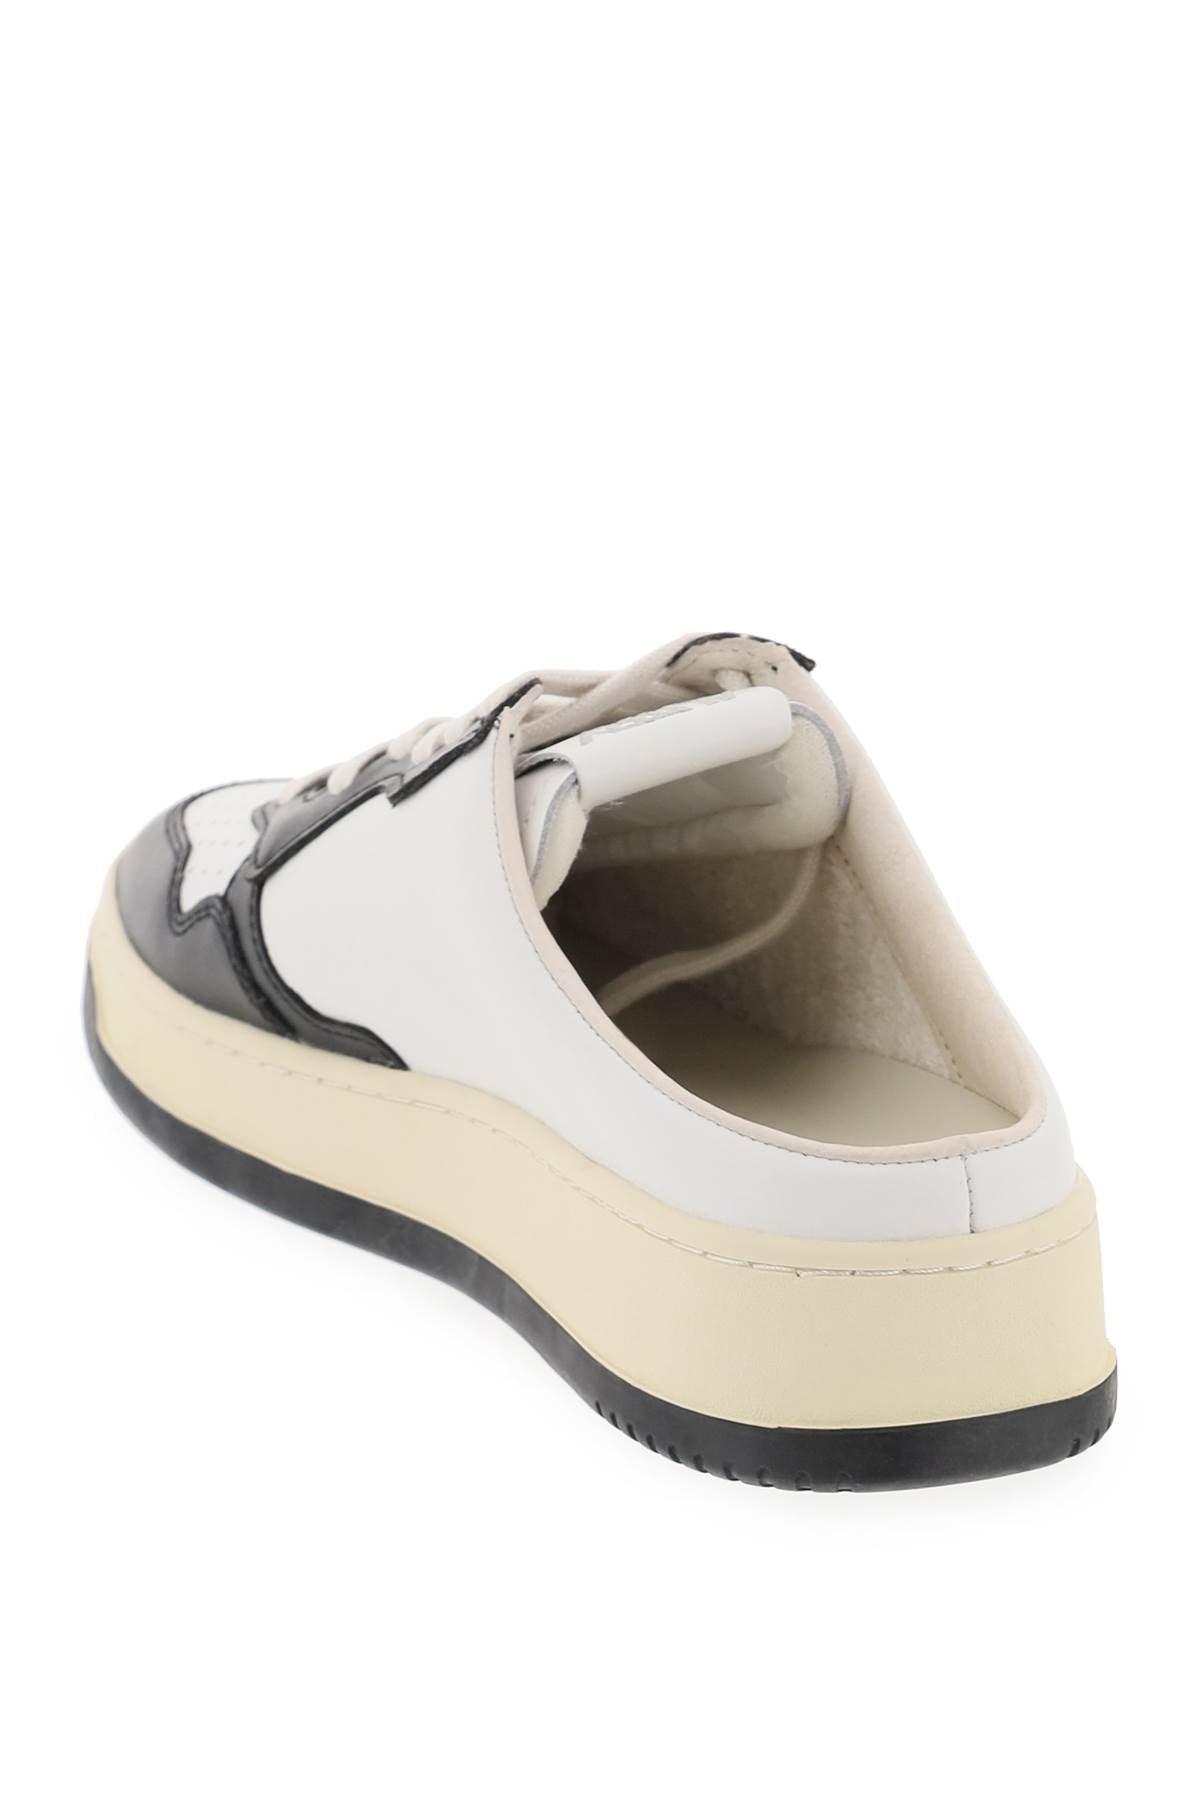 Autry Medalist Mule Low Sneakers   White